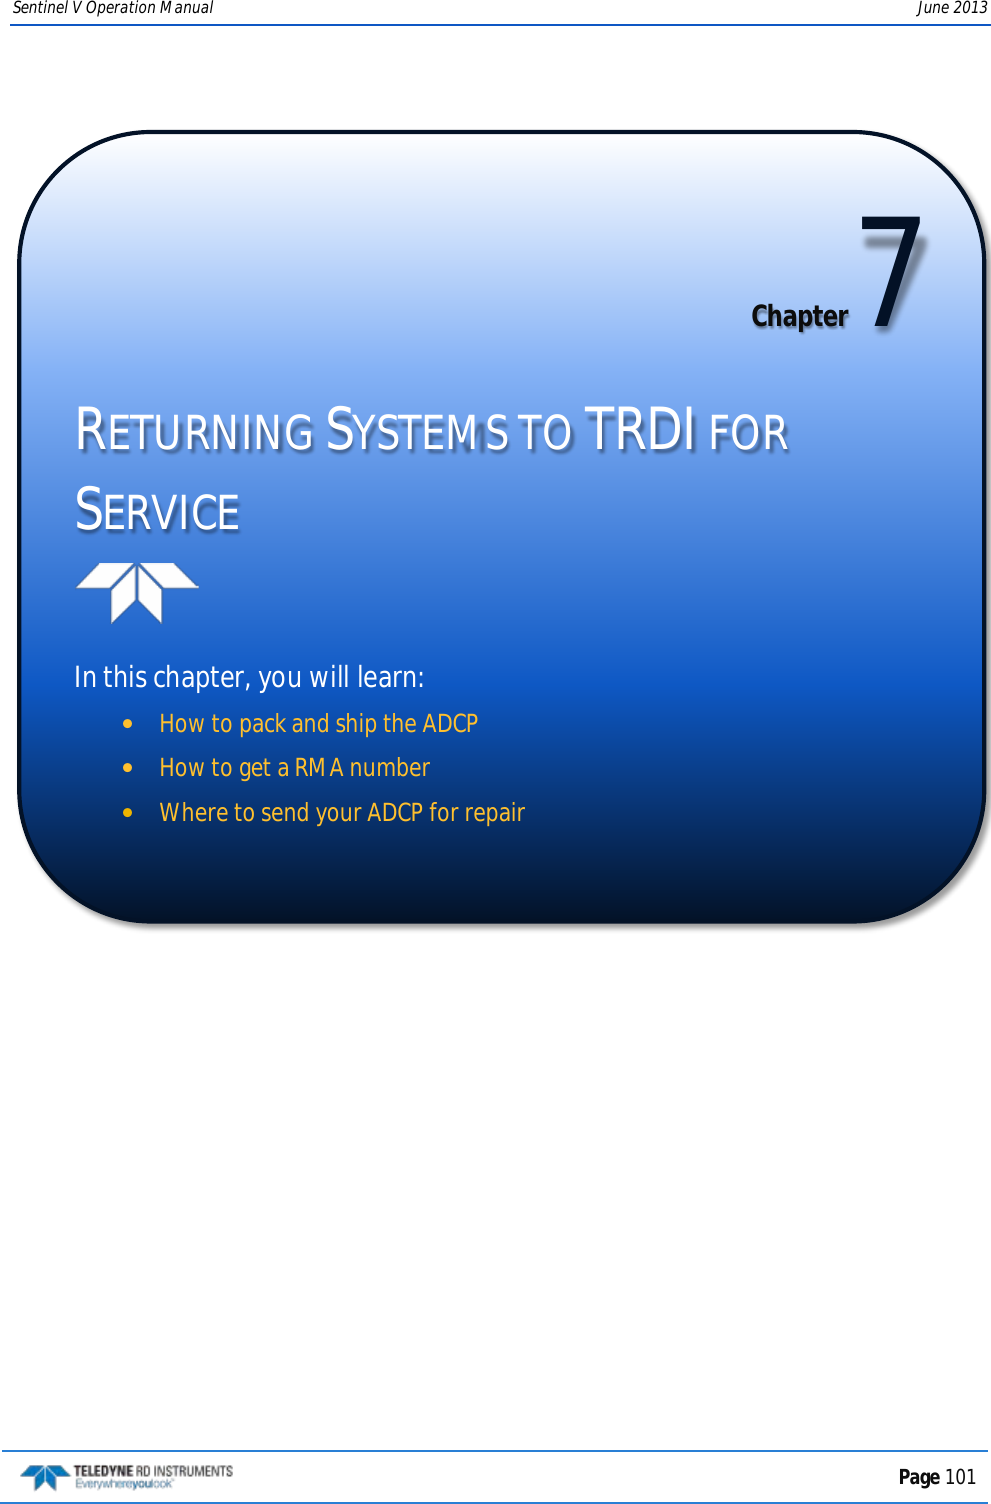 Sentinel V Operation Manual June 2013   Chapter 7 RETURNING SYSTEMS TO TRDI FOR SERVICE   In this chapter, you will learn: •How to pack and ship the ADCP •How to get a RMA number •Where to send your ADCP for repair   Page 101  